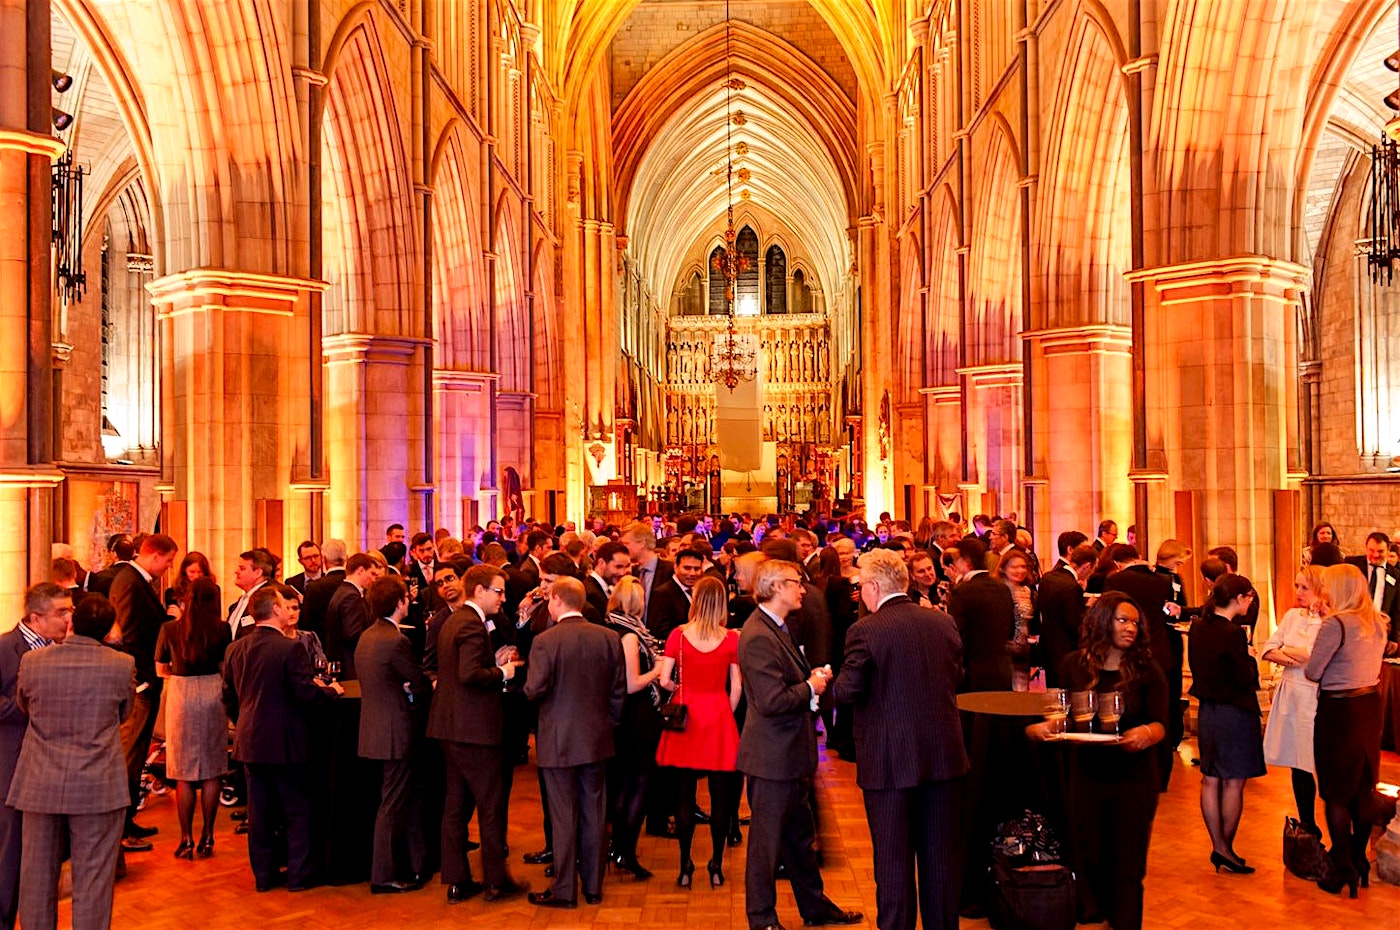 Southwark Cathedral The Nave London Bridge Christmas Party